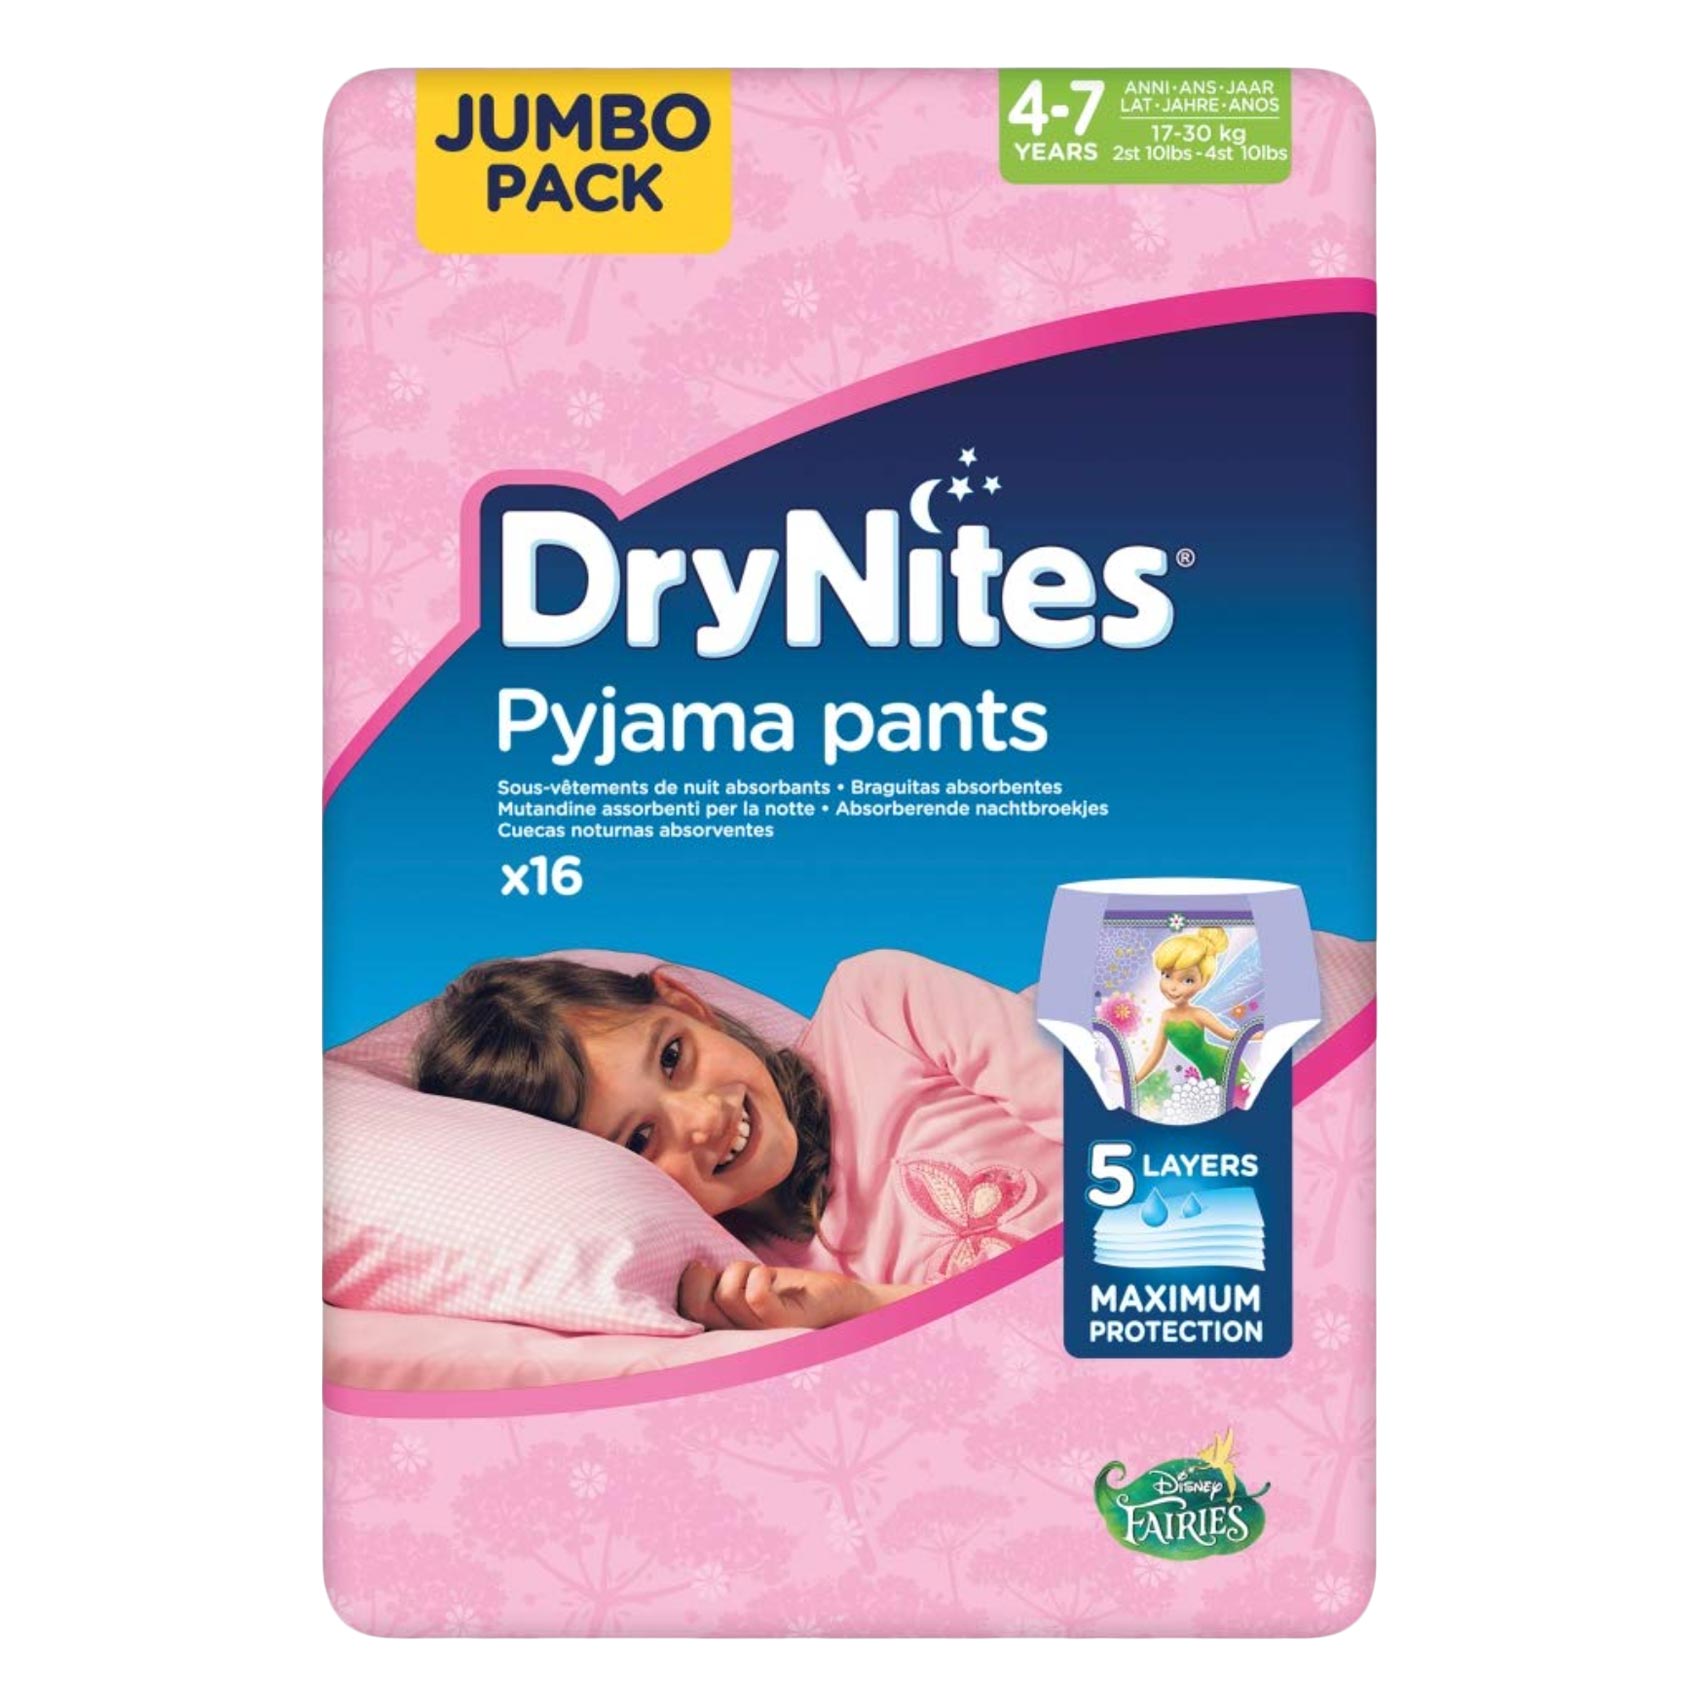 Buy Pampers Baby Pants Diapers Jumbo Pack Medium Size 3 60 Count 6-11 KG  Online - Shop Baby Products on Carrefour Lebanon